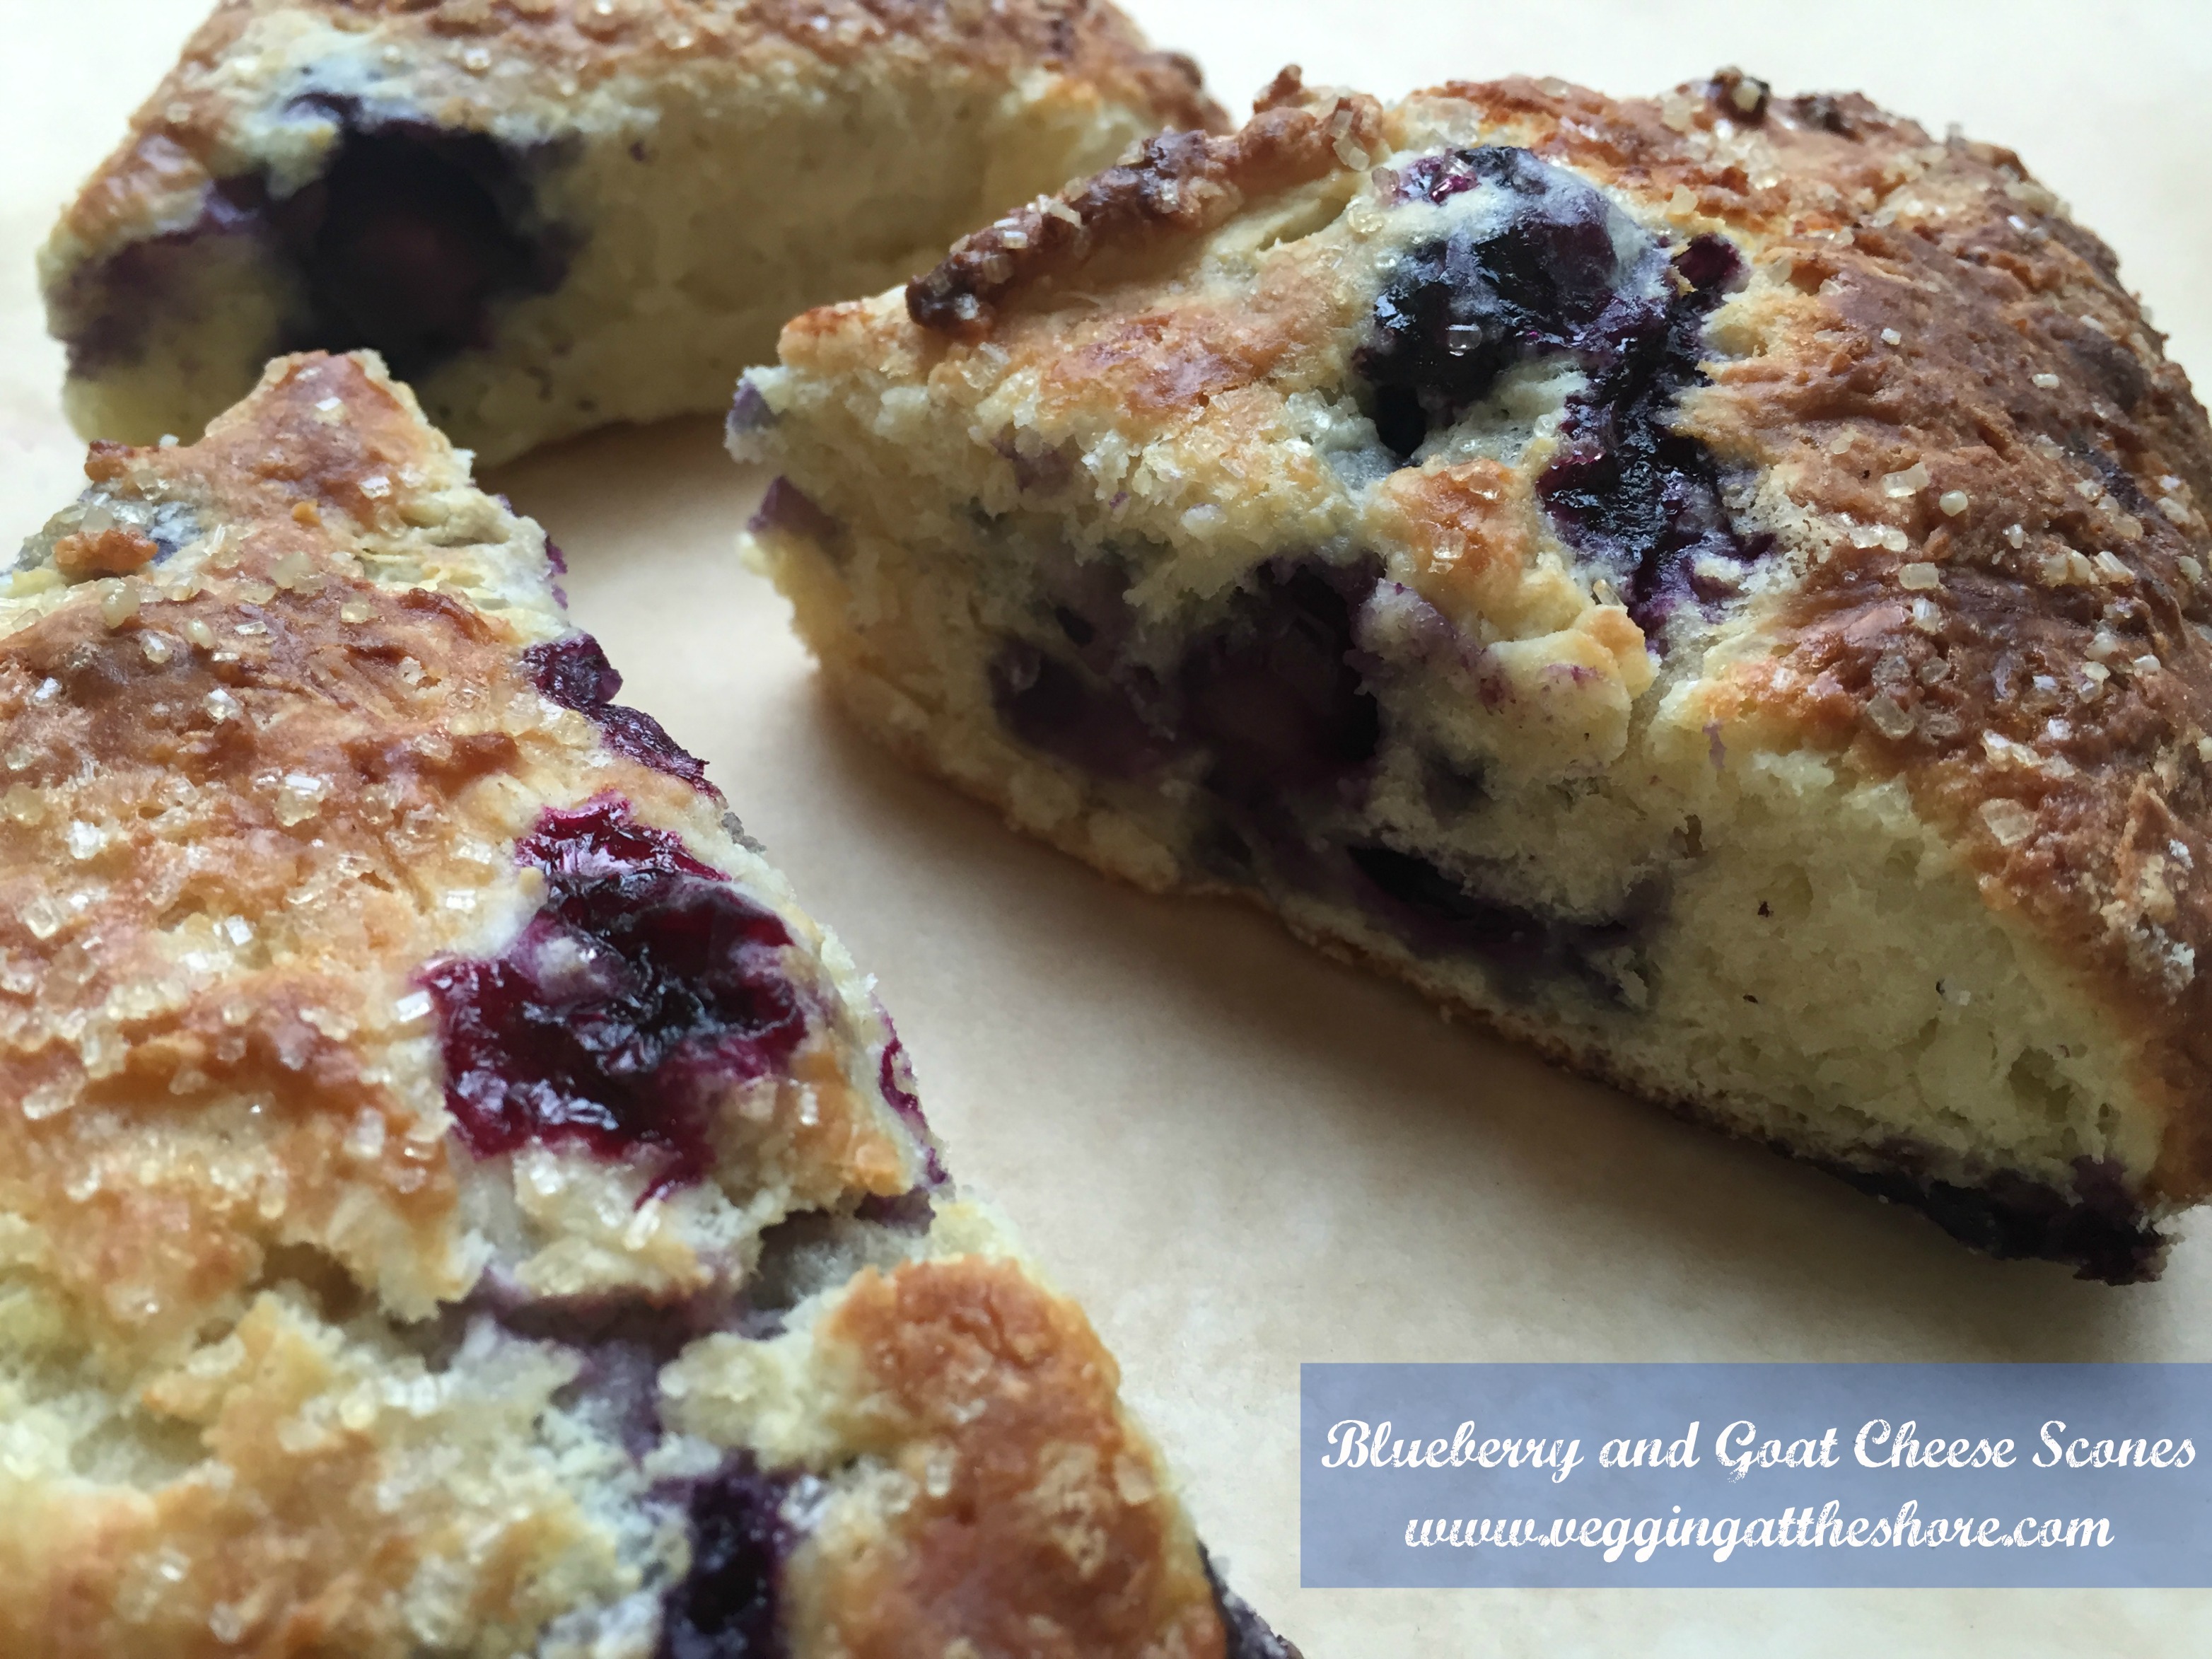 Blueberry and Goat Cheese Scones